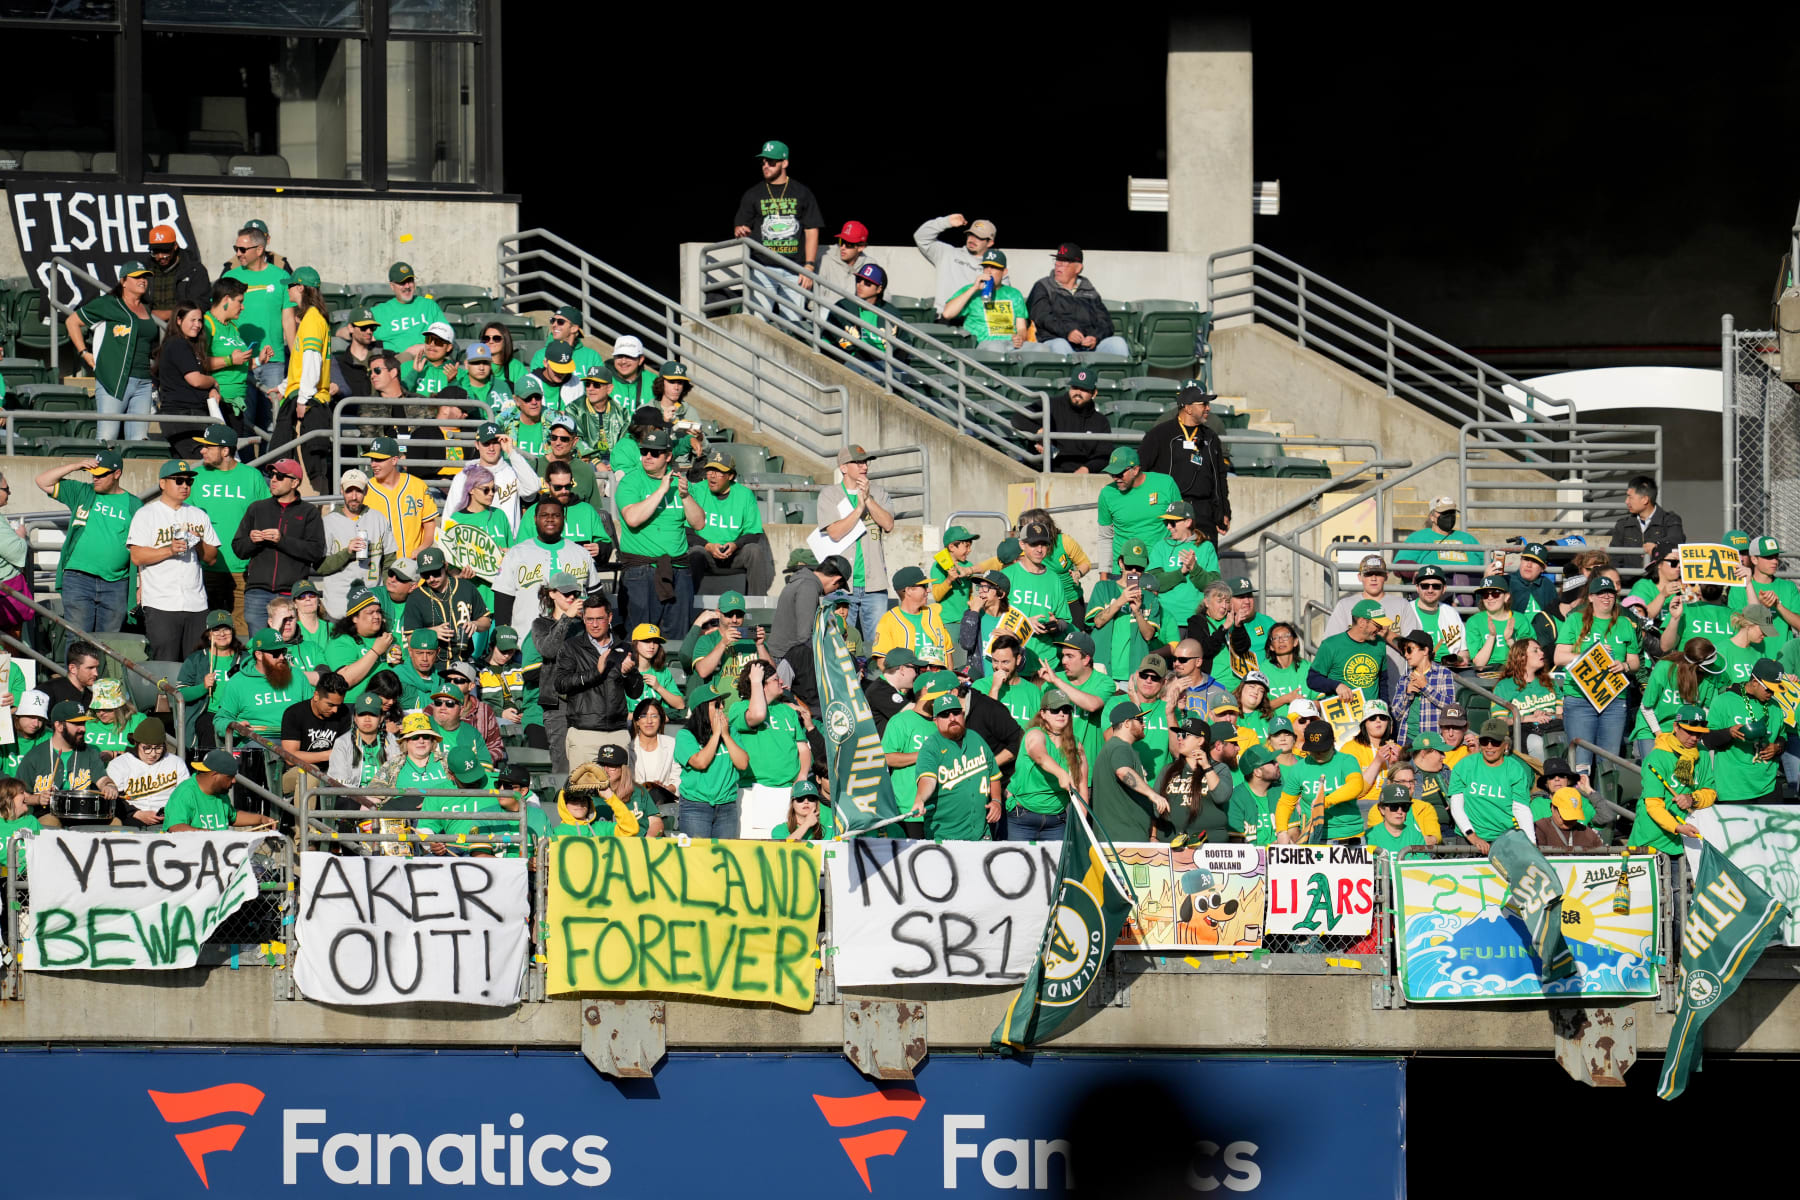 A's win seventh straight game as fans hold boycott